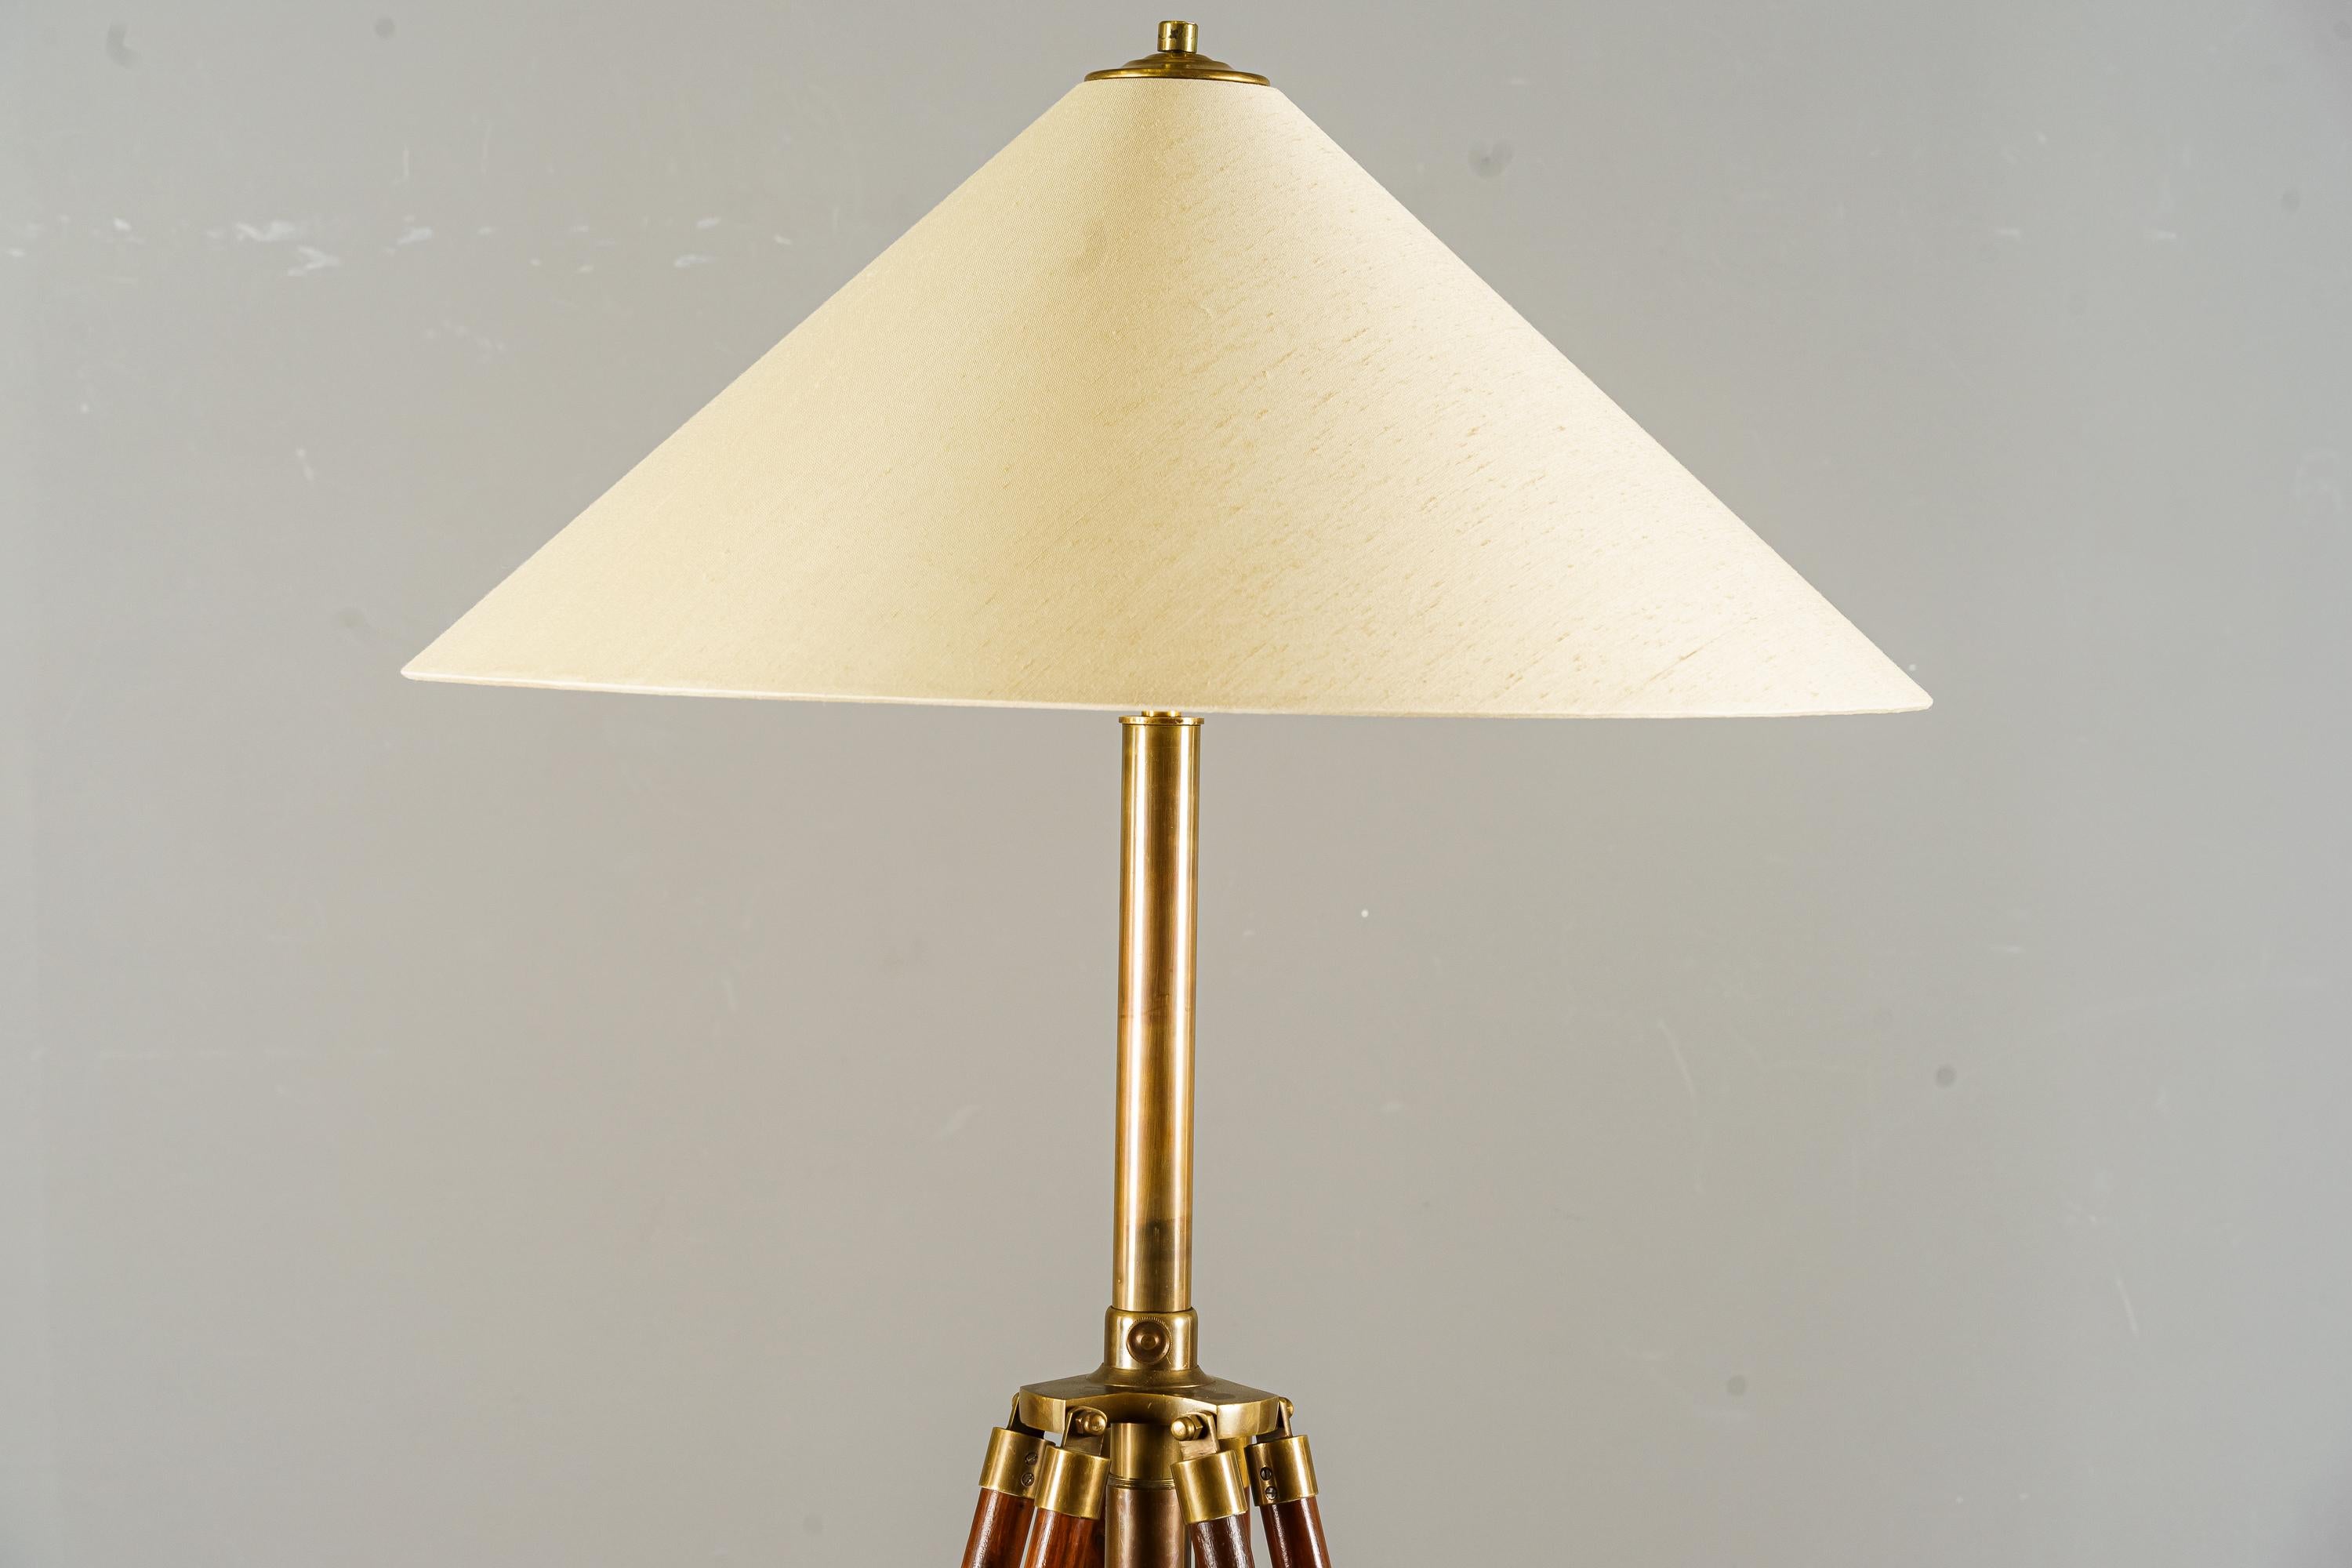 Extendable Floor lamp vienna around 1950s
Extendable from 150cm up to 190cm
The shade is replaced ( new )